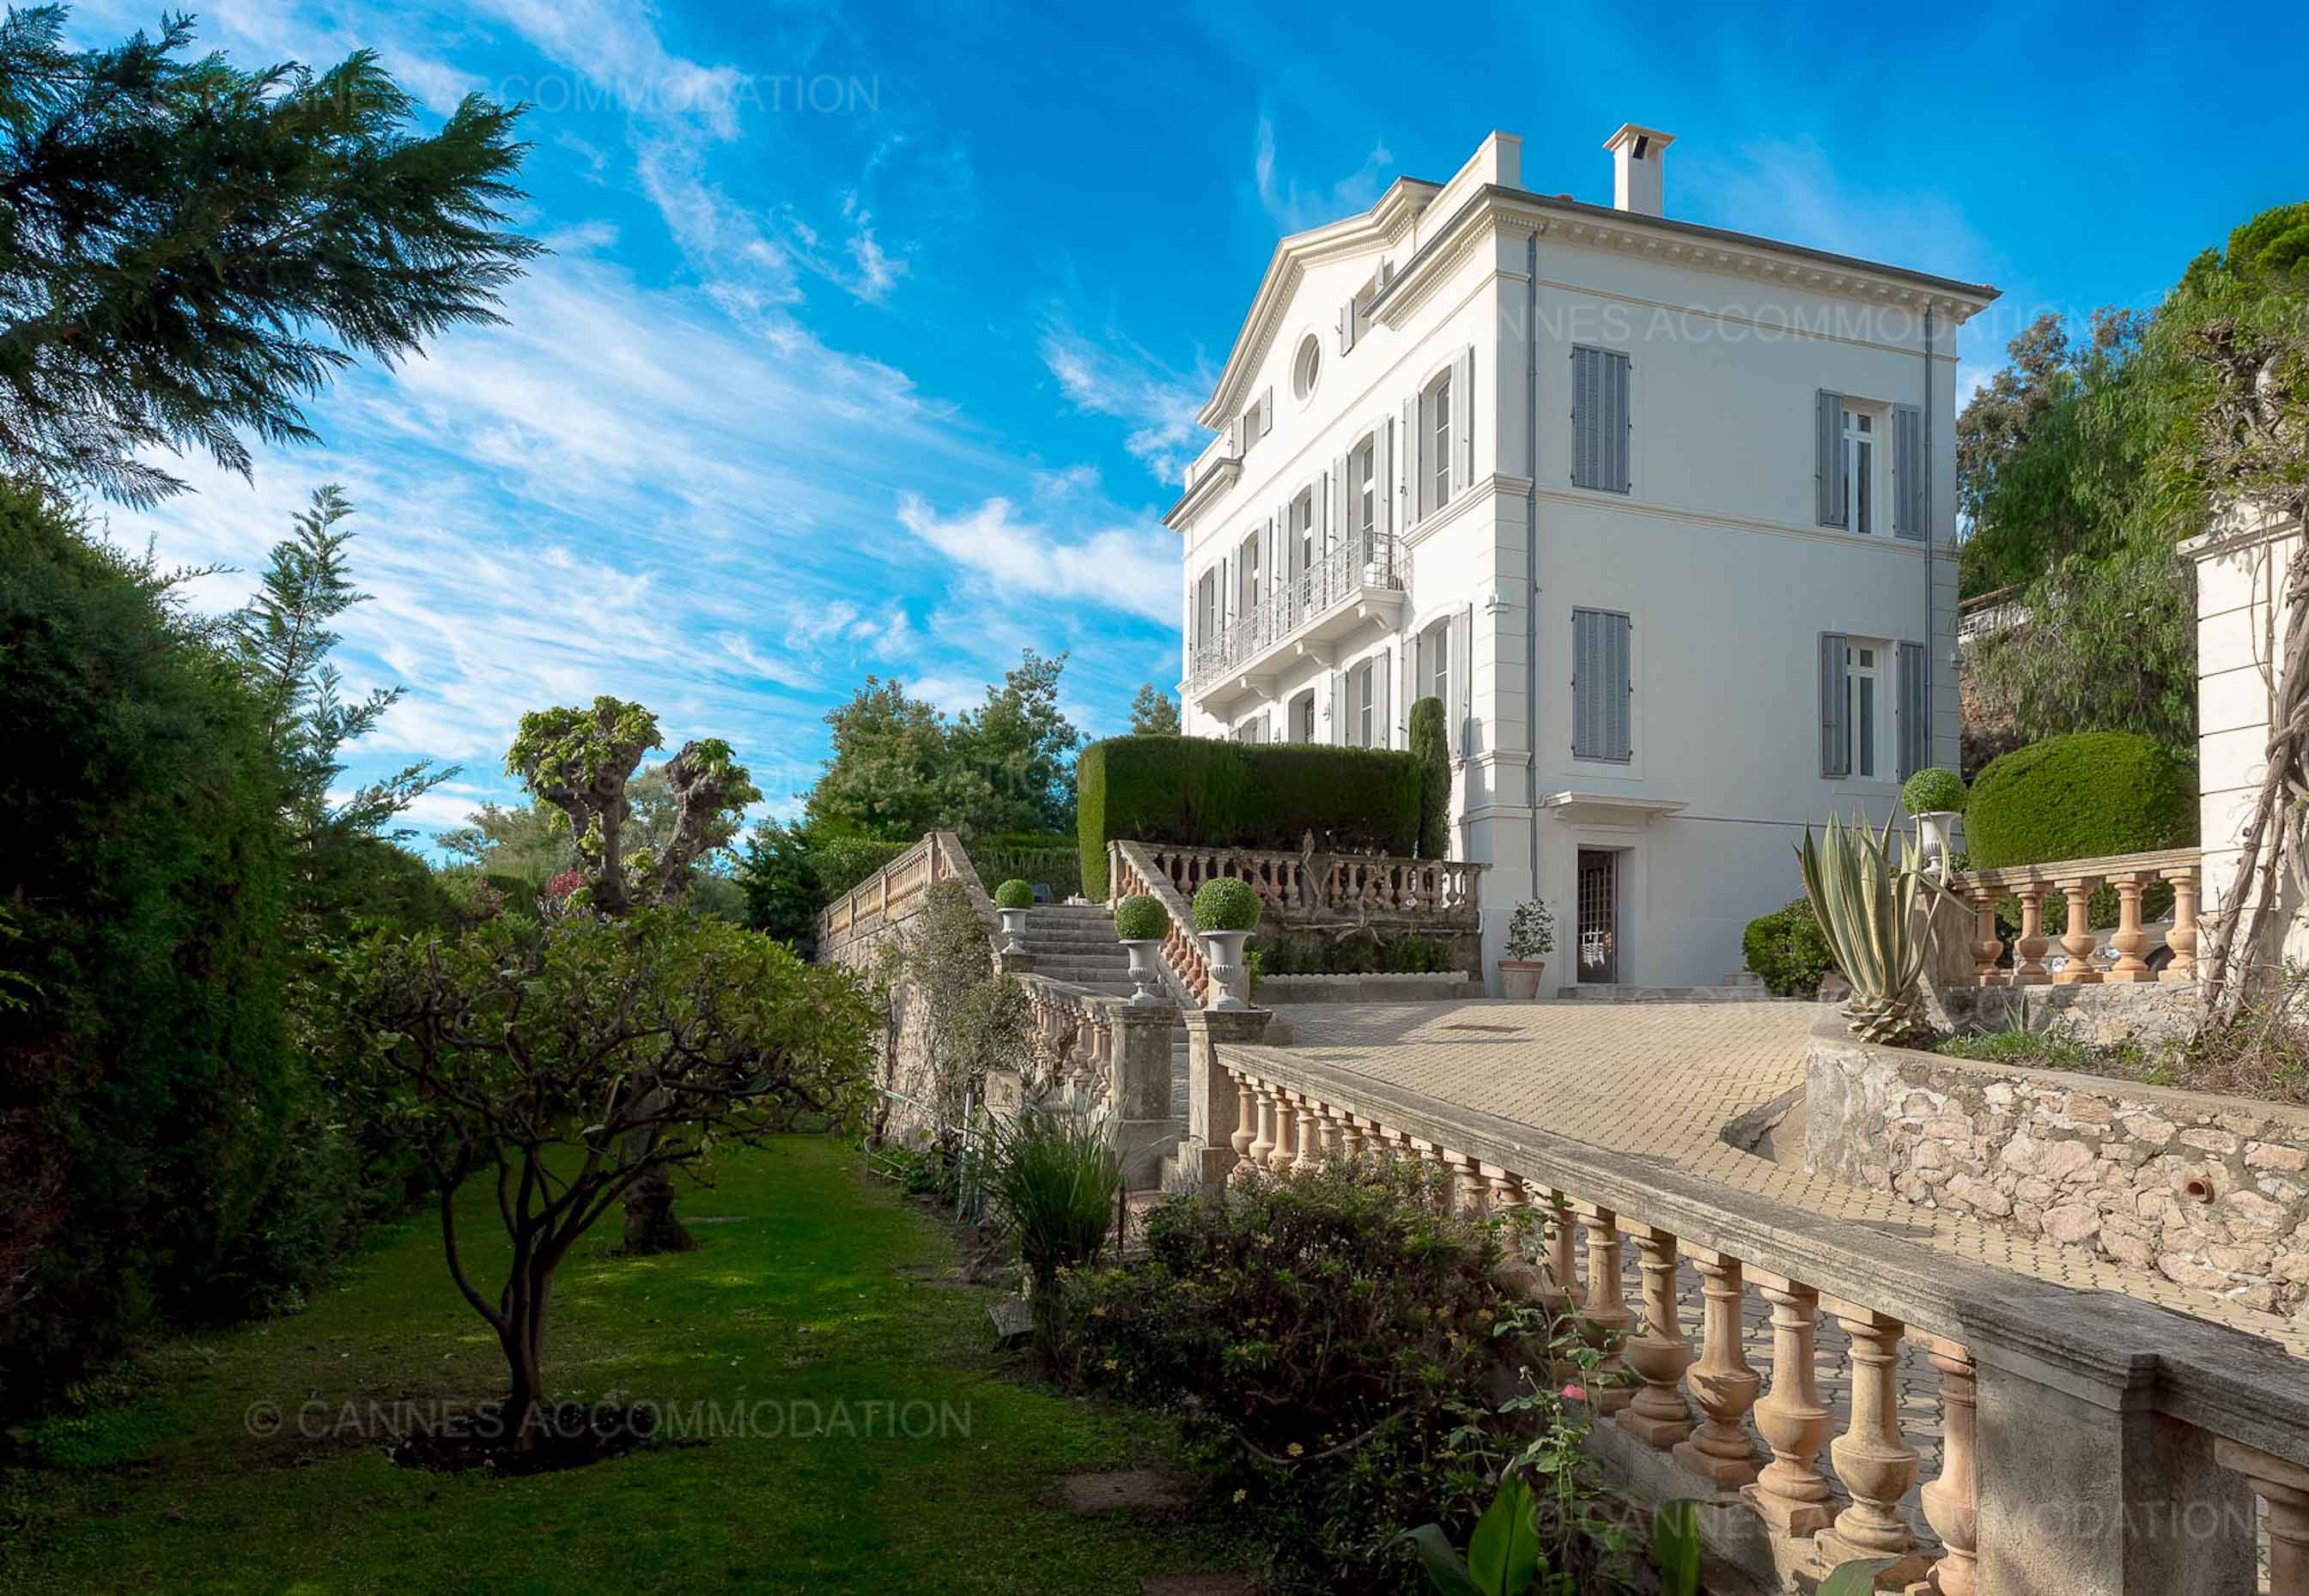 Cannes Accommodations Sell your apartment or your villa in Cannes